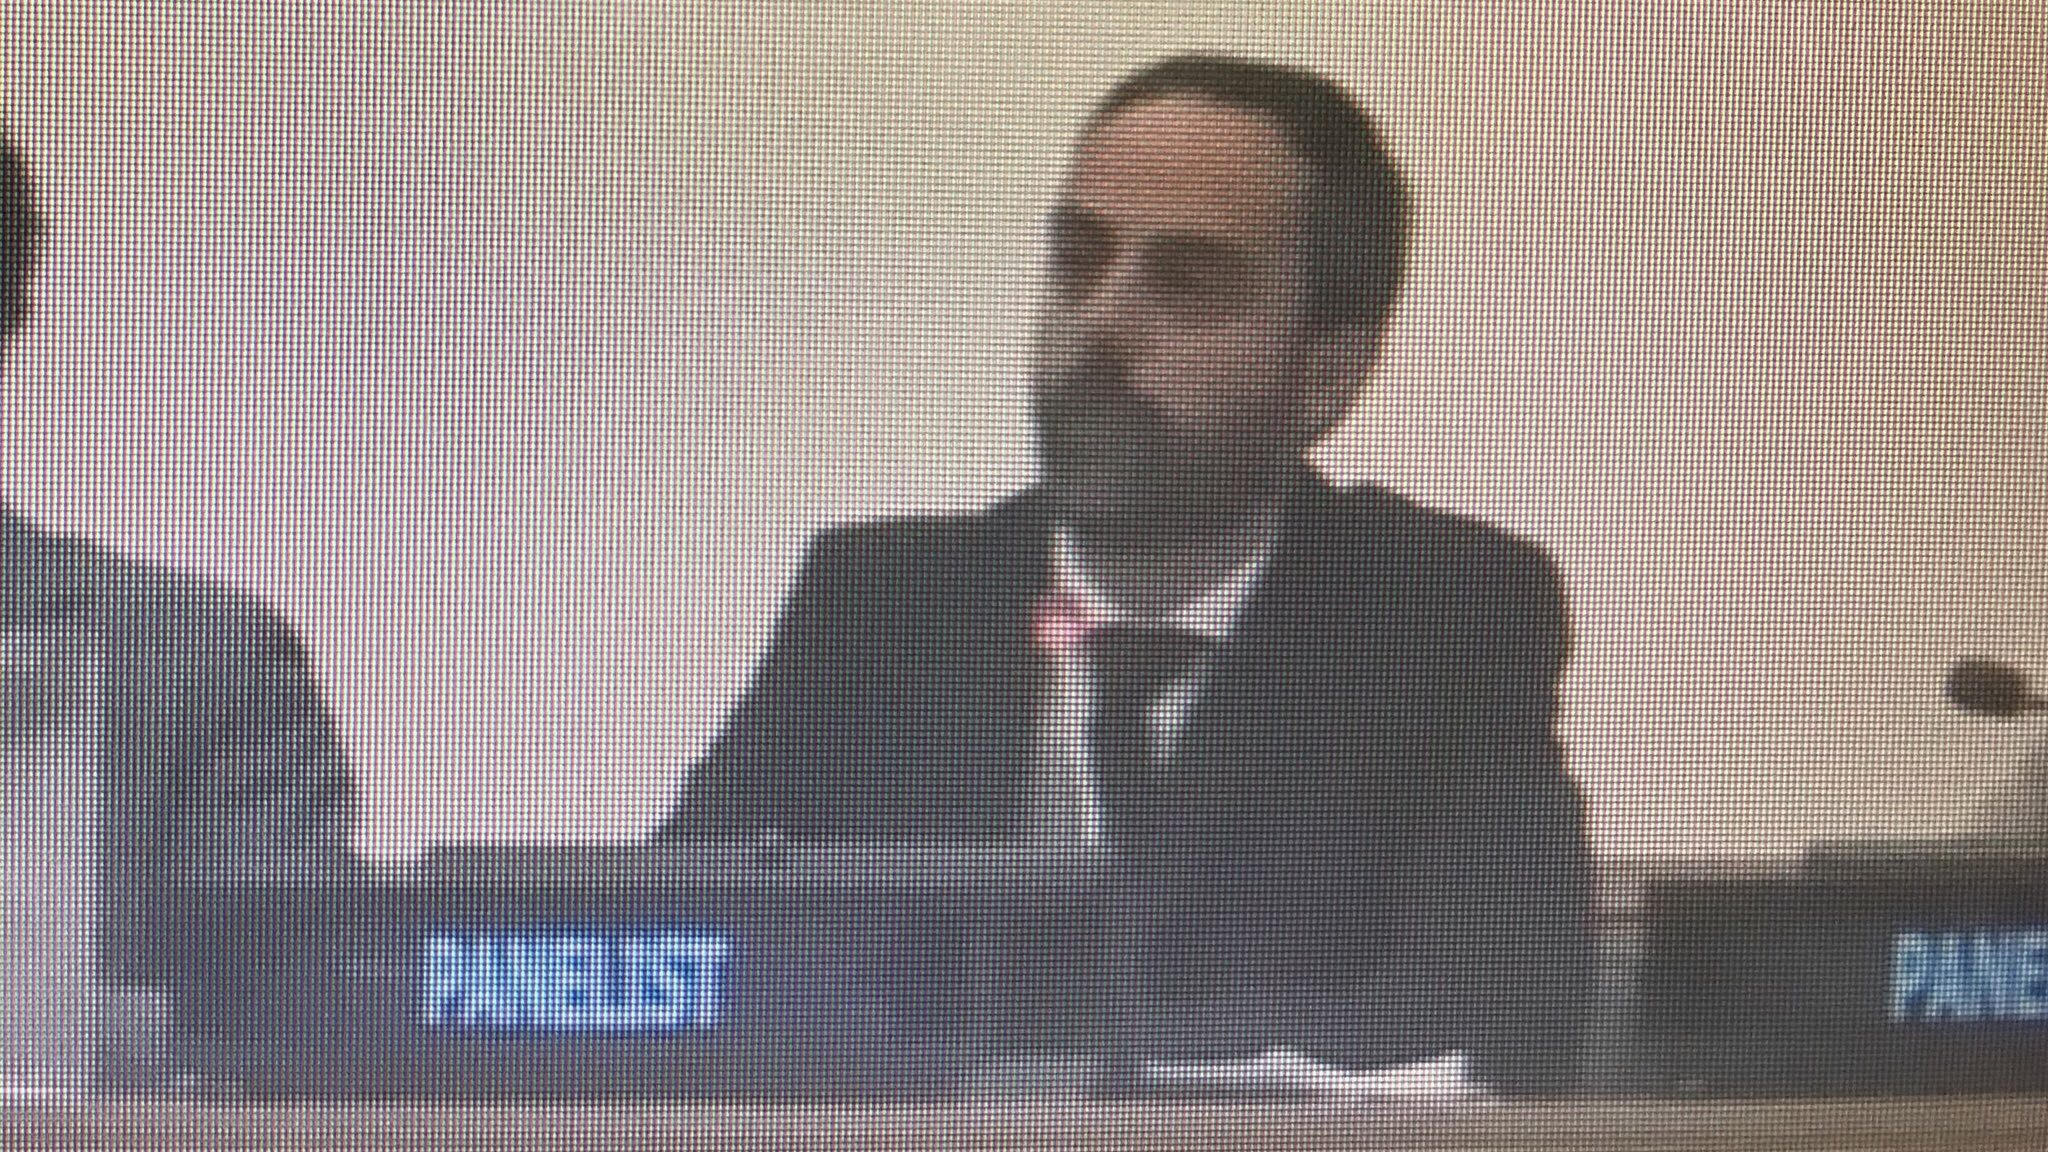 Intervention LDAC Executive Secretary as panellist at United Nations, New York May 2019